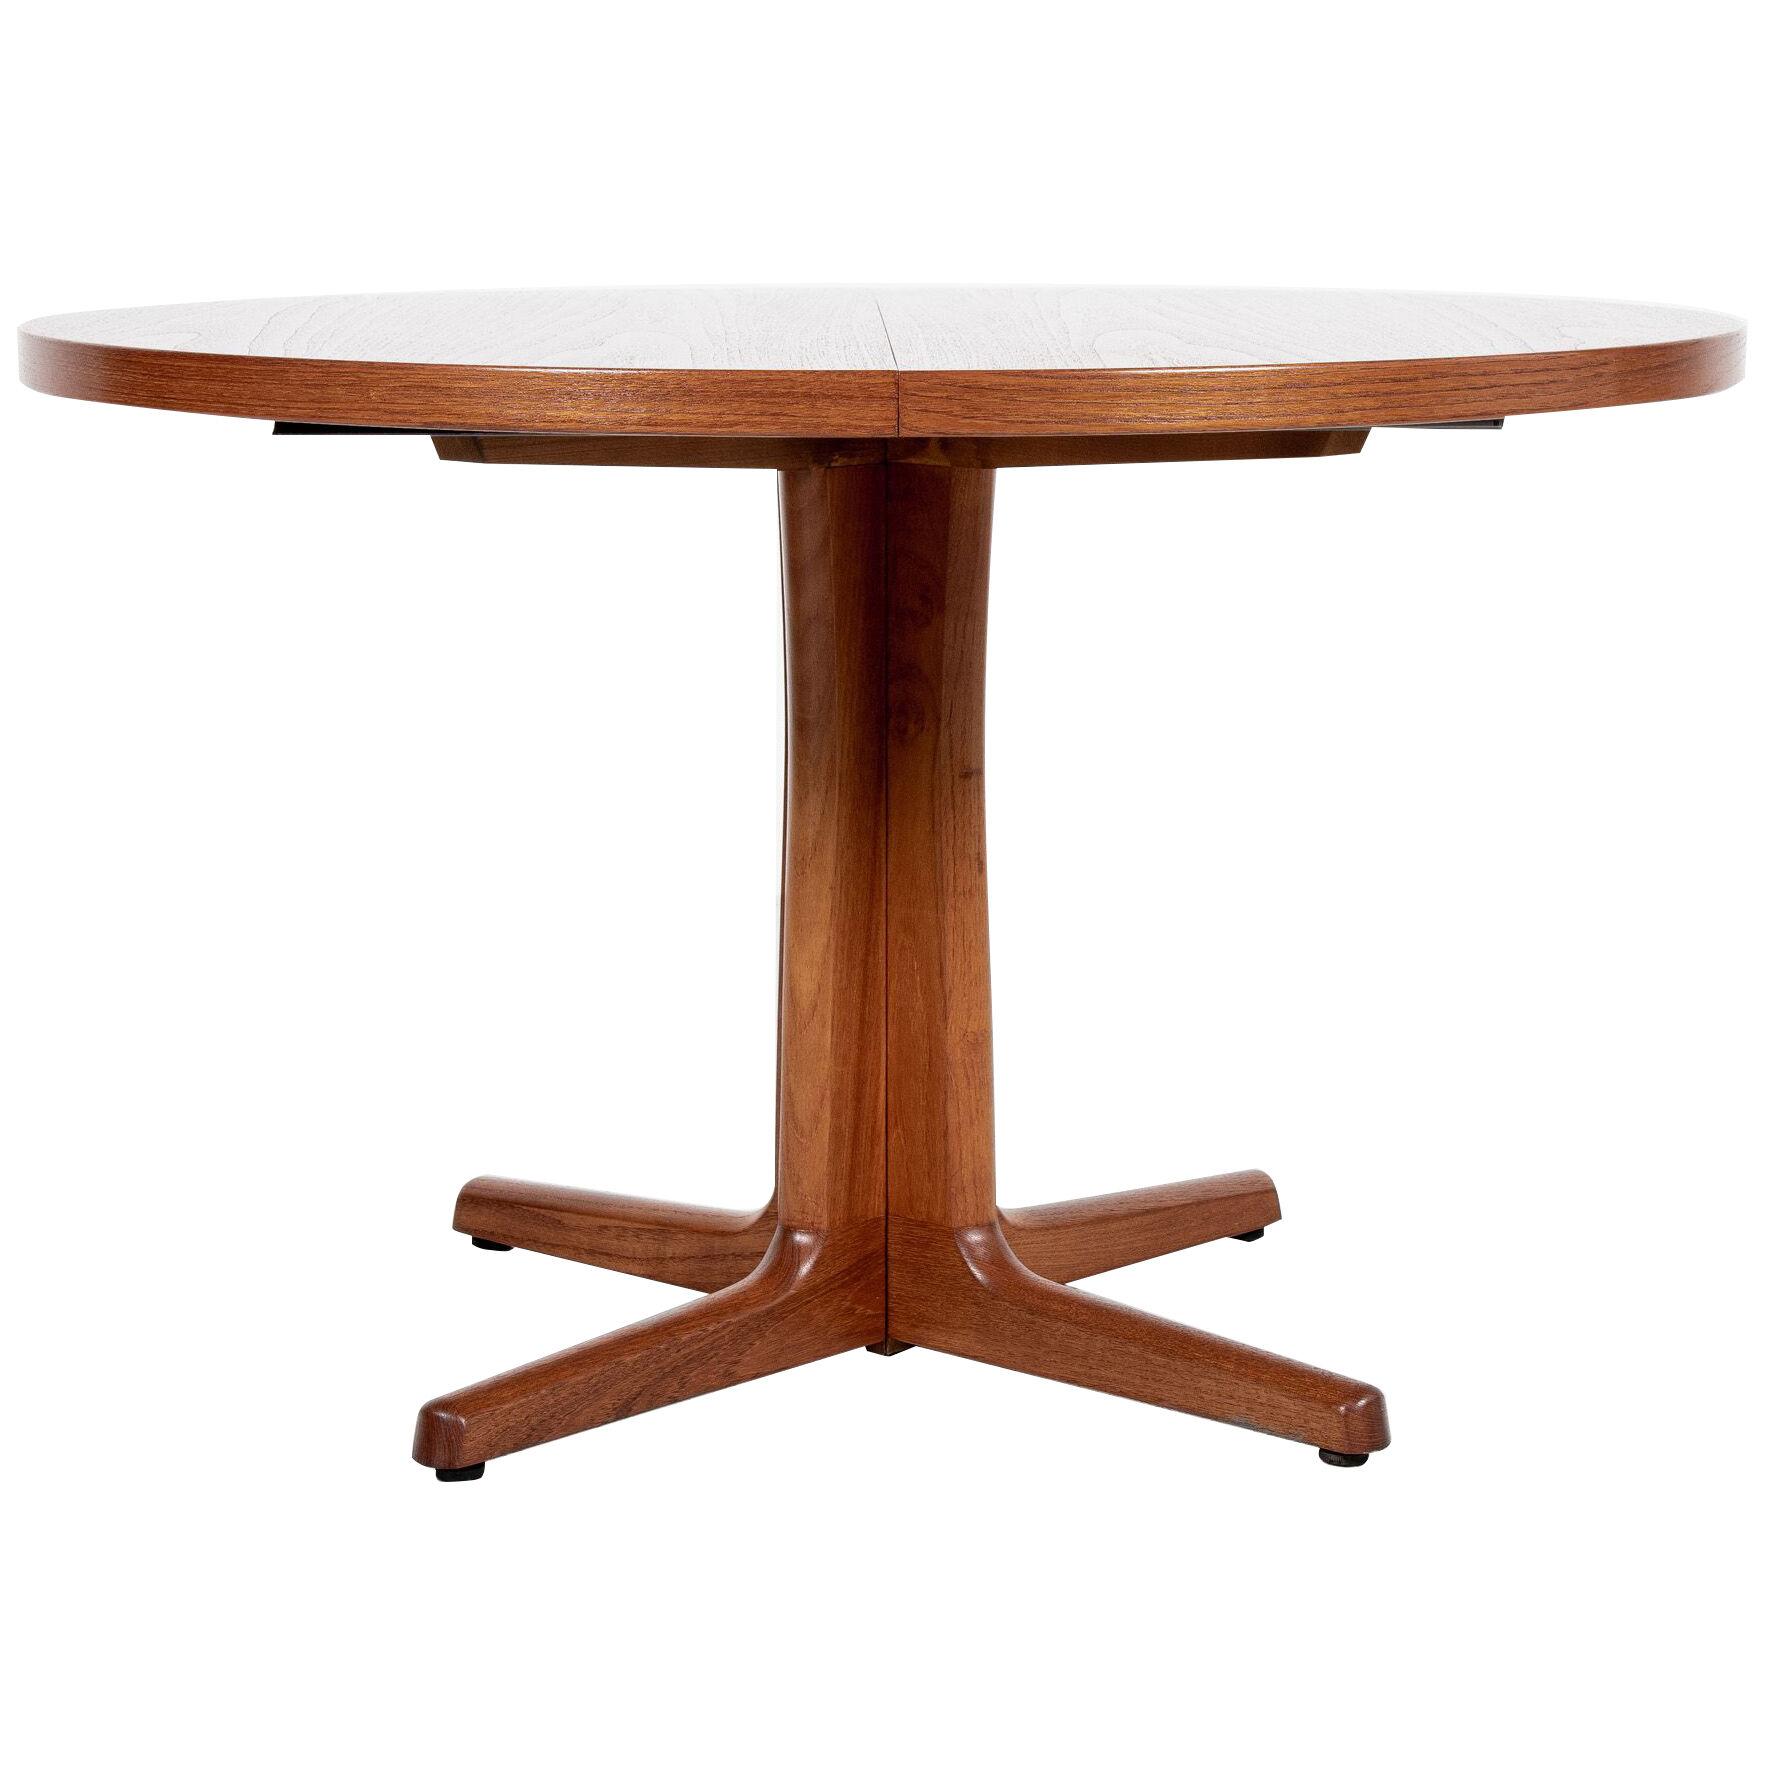 Midcentury Danish round extendable dining table in teak 1960s - with flat border